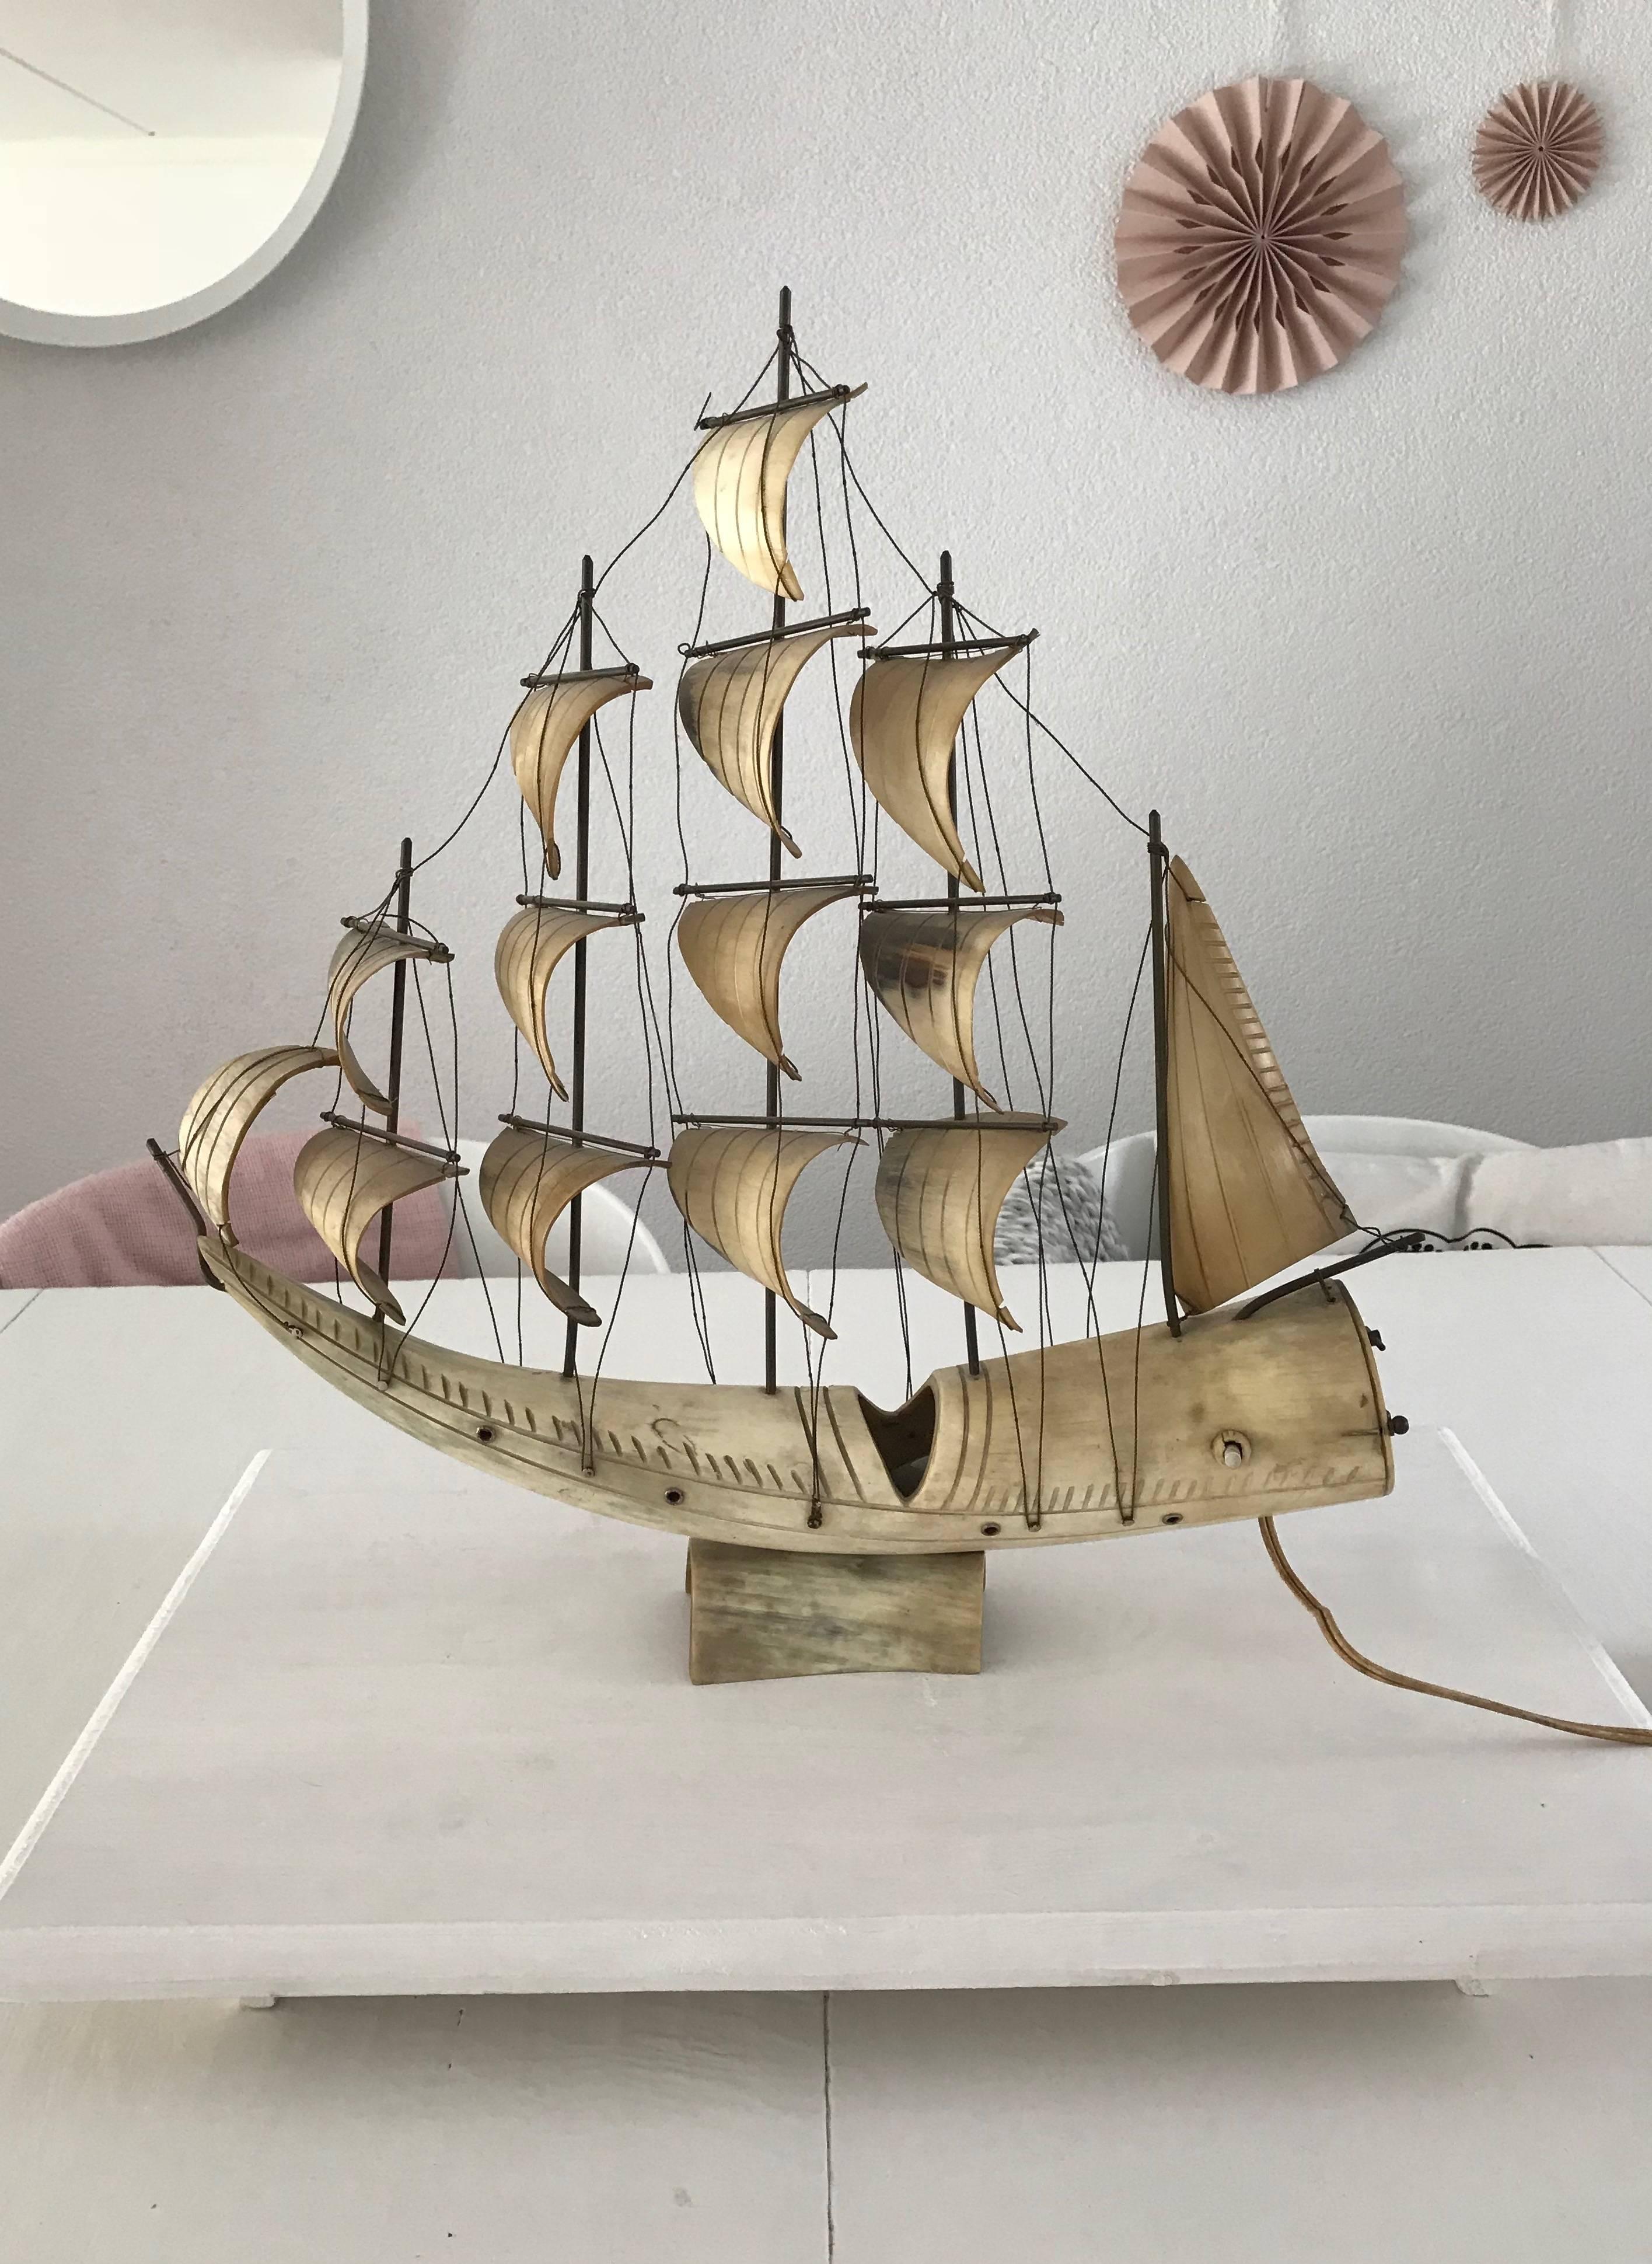 Artistic and very well made, five masted sailing boat table lamp.

If you are a sailing boat enthousiast or if you work in a marina or if you are decorating an interior with a sailing or maritime theme then this wonderfully hand-crafted five-master